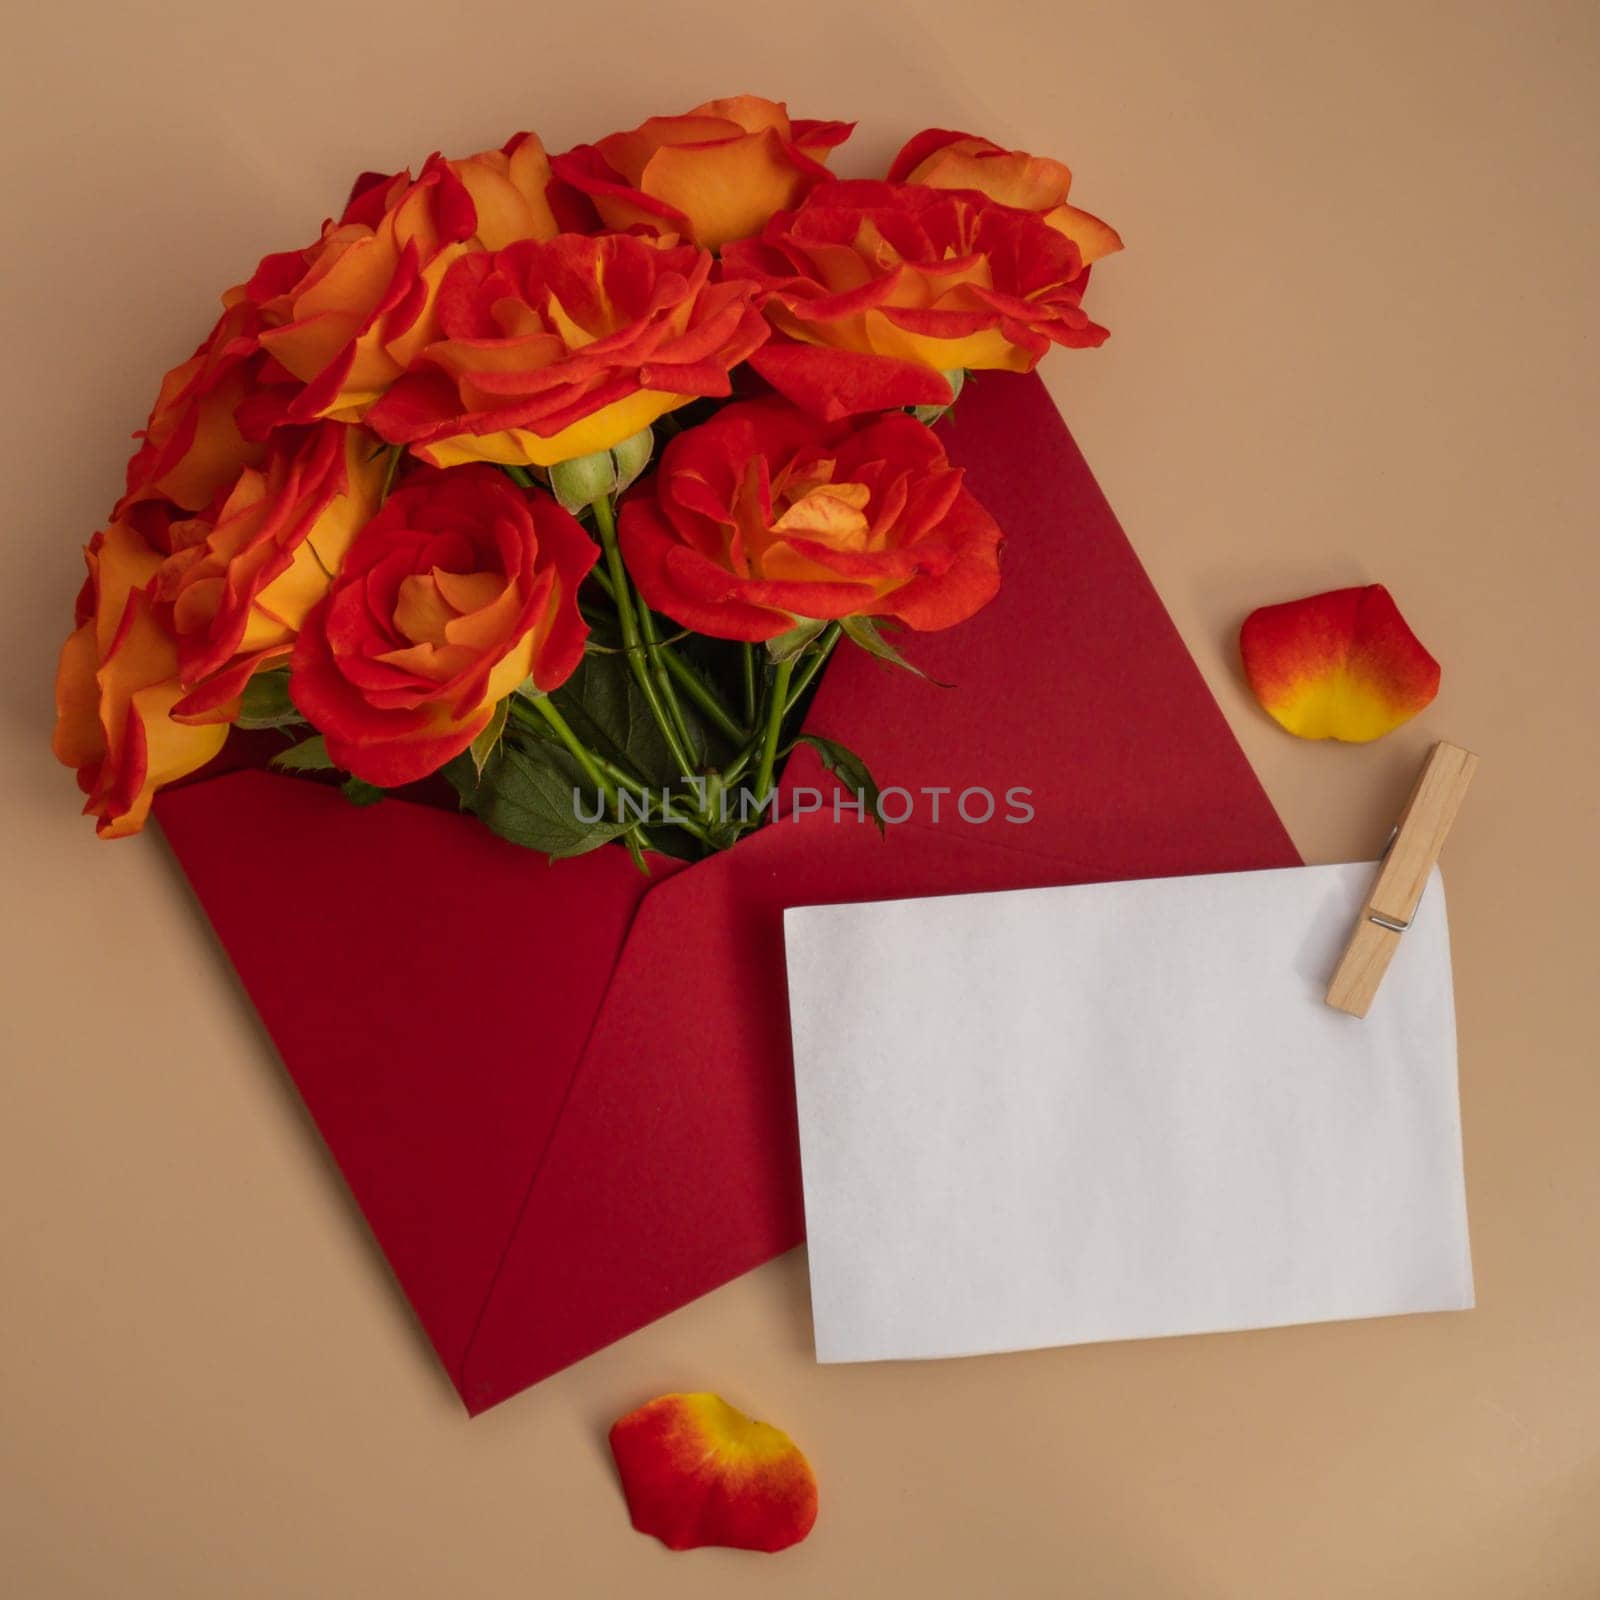 Beautiful red roses flowers in red postal envelope on neutral beige background, empty paper note copy space for text, spring time, greeting card for holiday. Flower delivery. Delicate red yellow roses. Minimal trendy composition. Romantic pastel flowers. Neutral earth tones